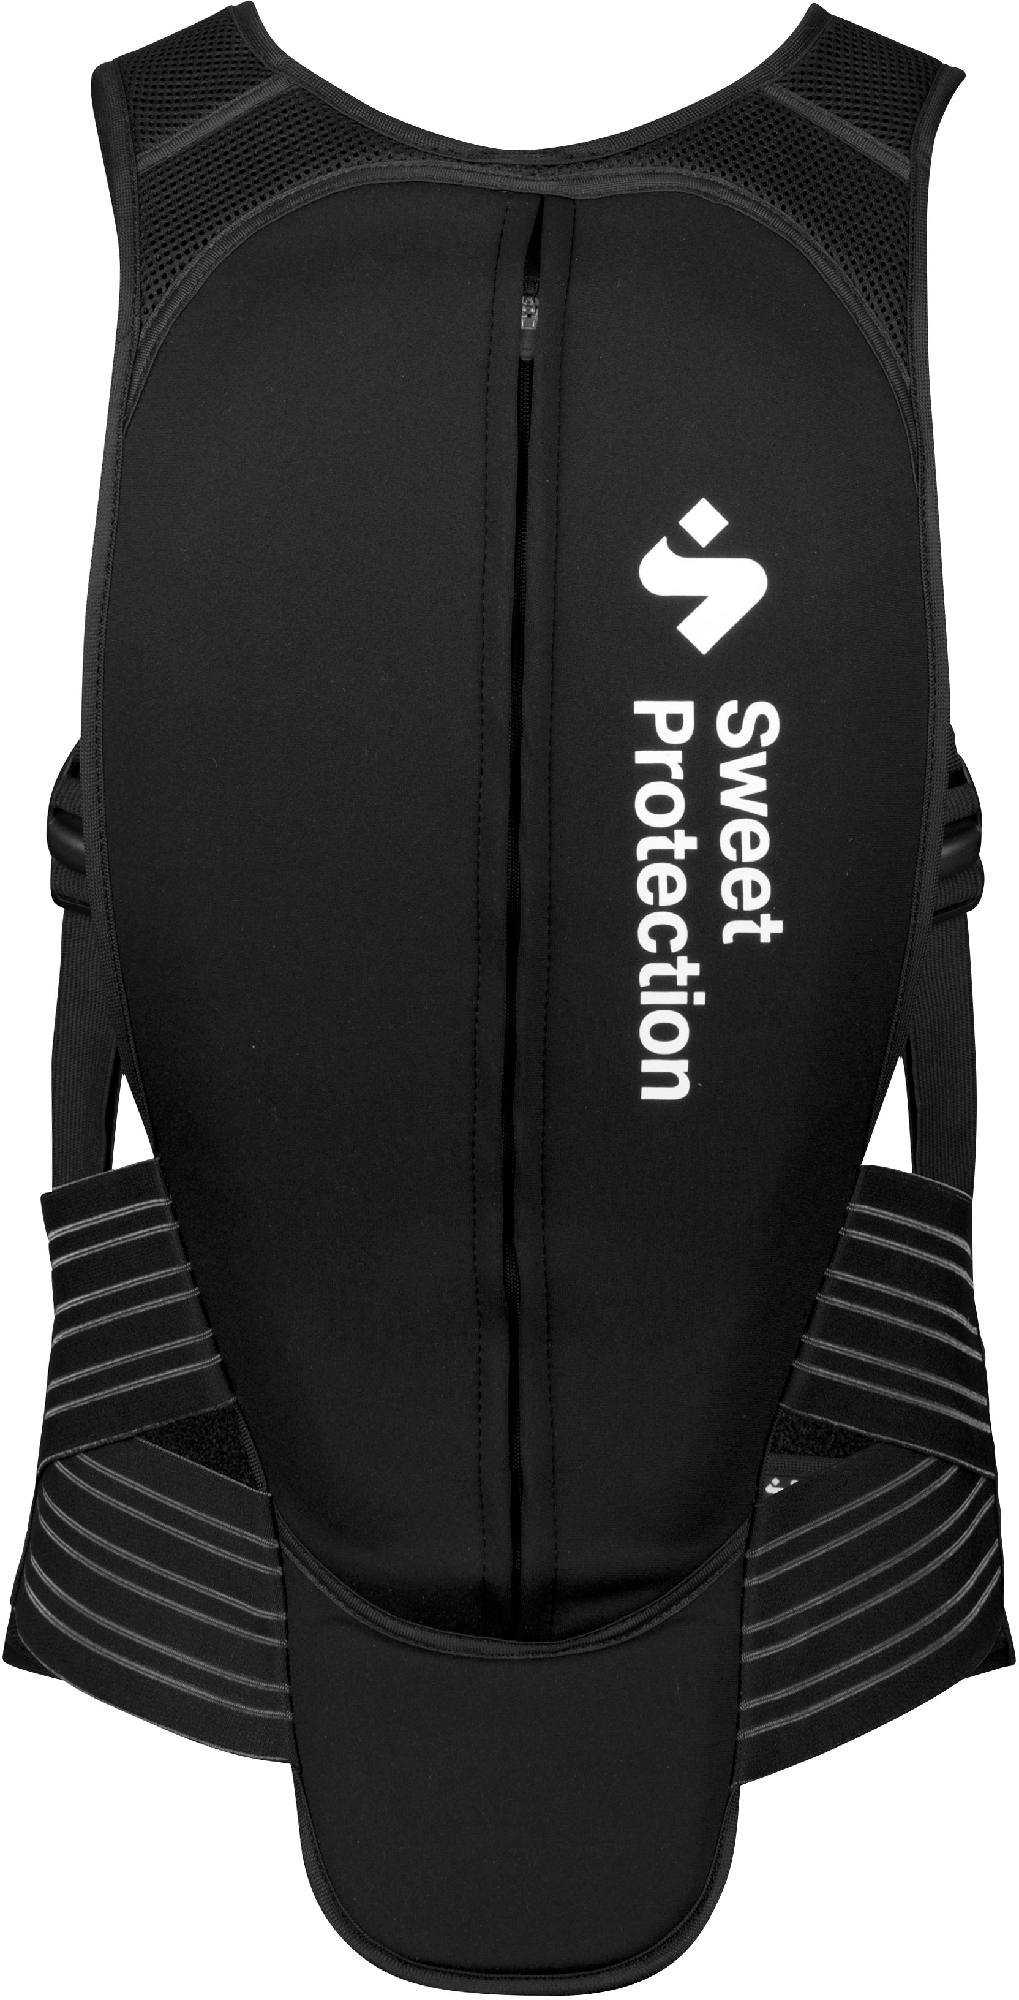 Sweet Back Protector